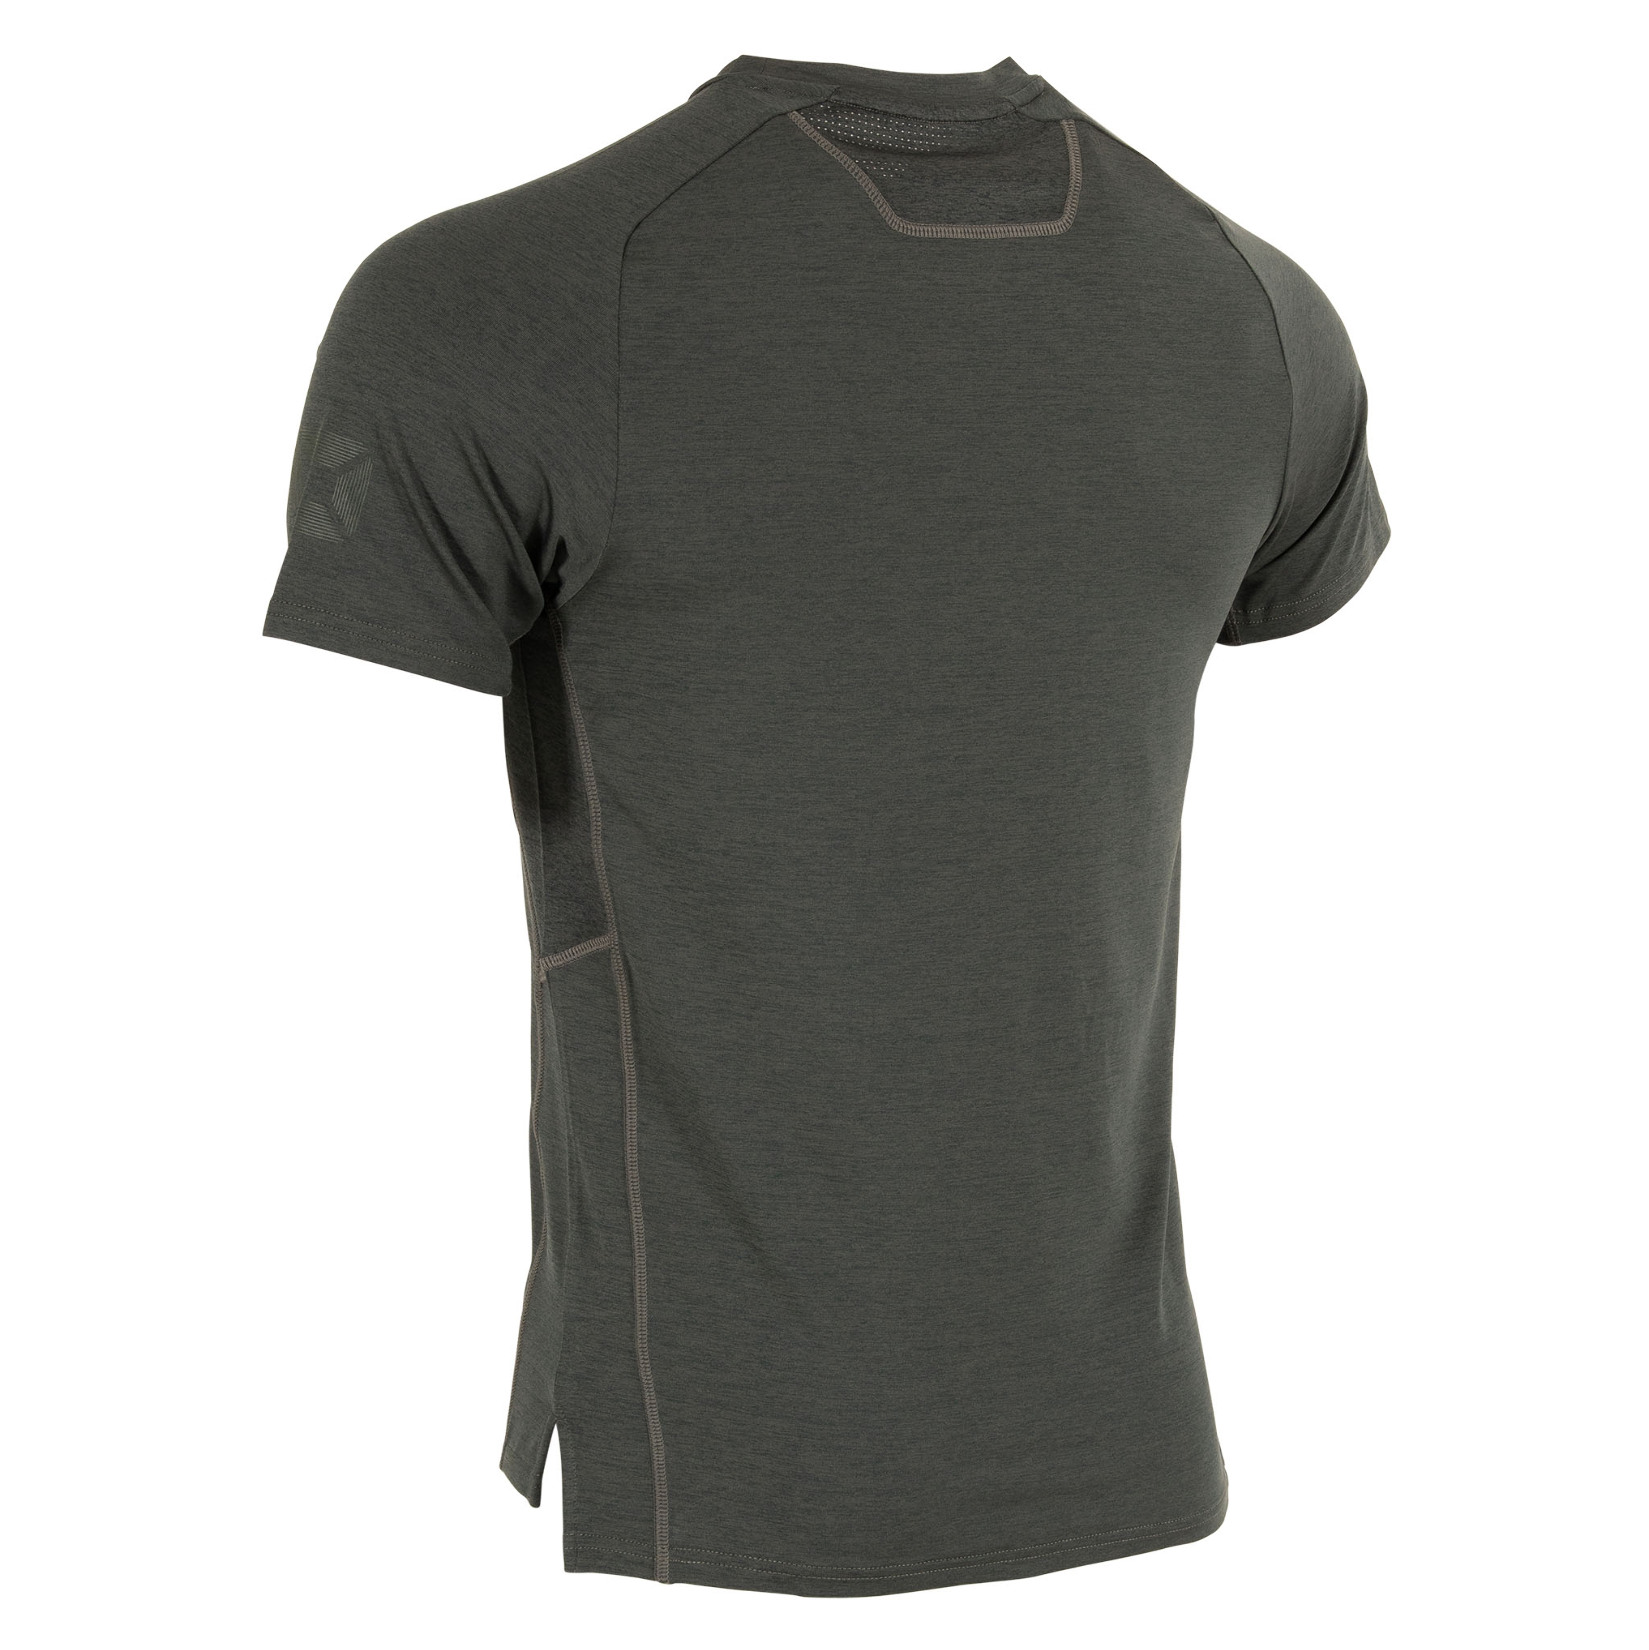 Stanno Functionals Training Tee